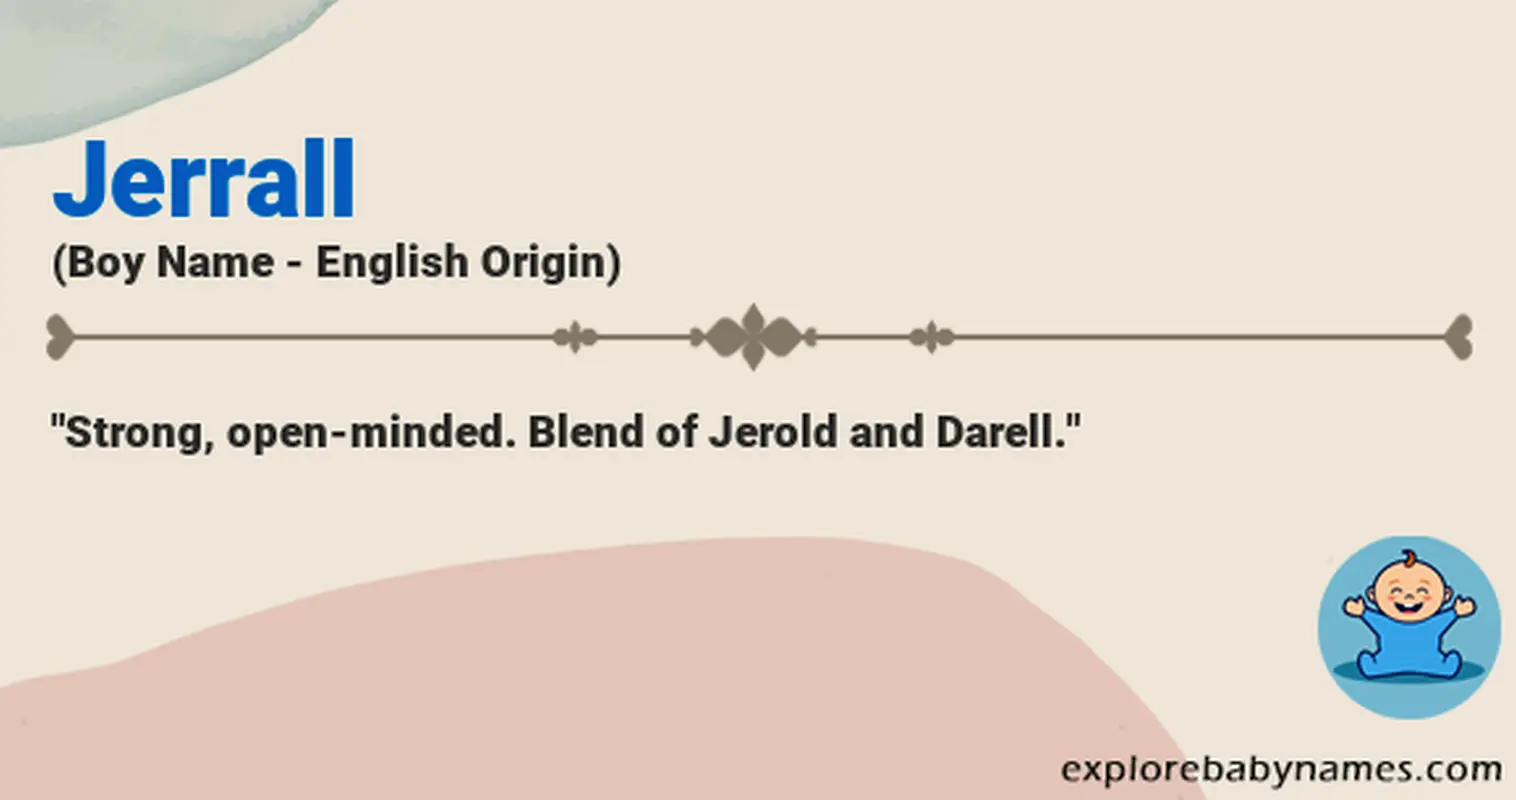 Meaning of Jerrall